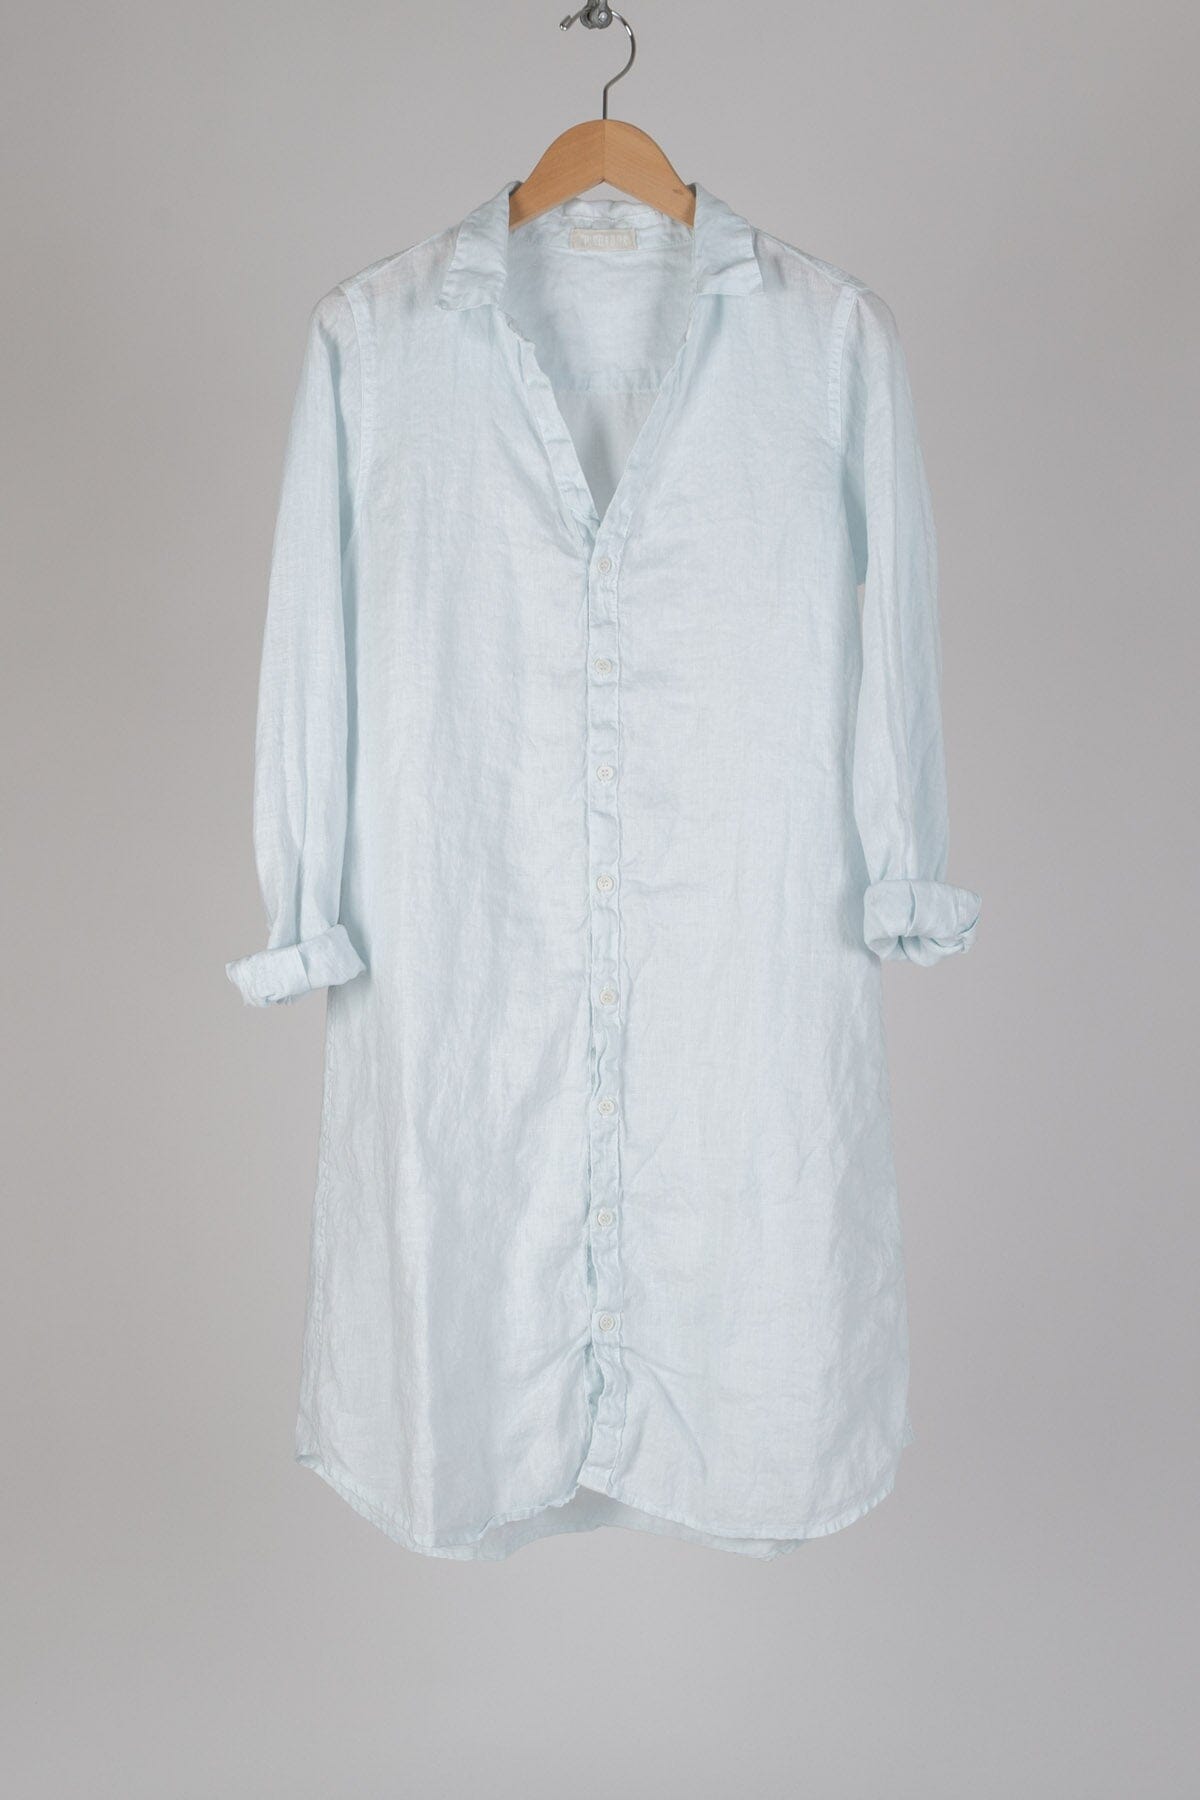 Tamsin - Linen S17 - Solid Linen Dresses CP Shades seafoam